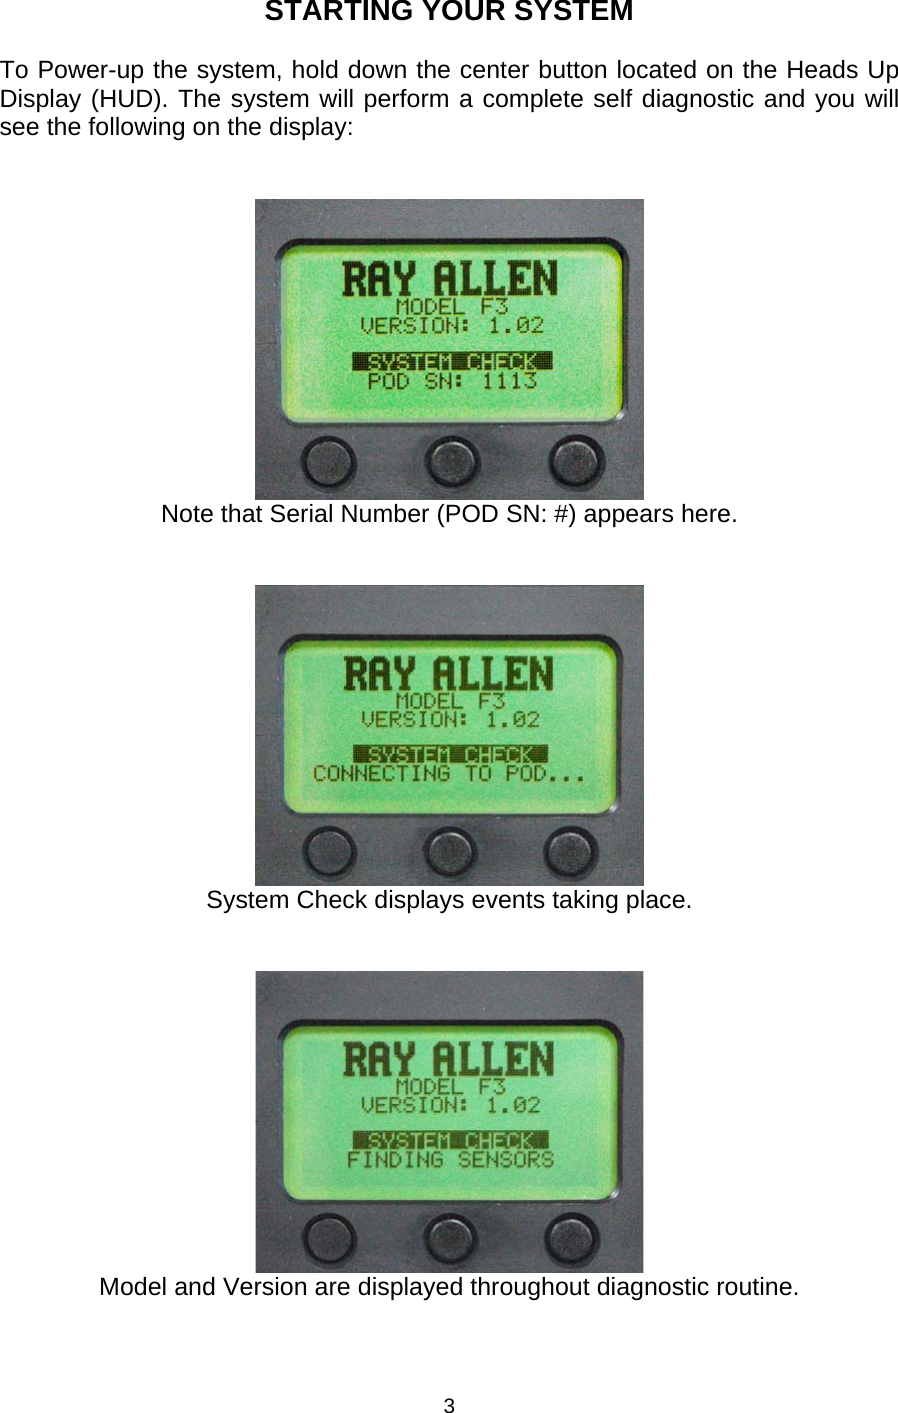 STARTING YOUR SYSTEM  To Power-up the system, hold down the center button located on the Heads Up Display (HUD). The system will perform a complete self diagnostic and you will see the following on the display:     Note that Serial Number (POD SN: #) appears here.    System Check displays events taking place.    Model and Version are displayed throughout diagnostic routine. 3 